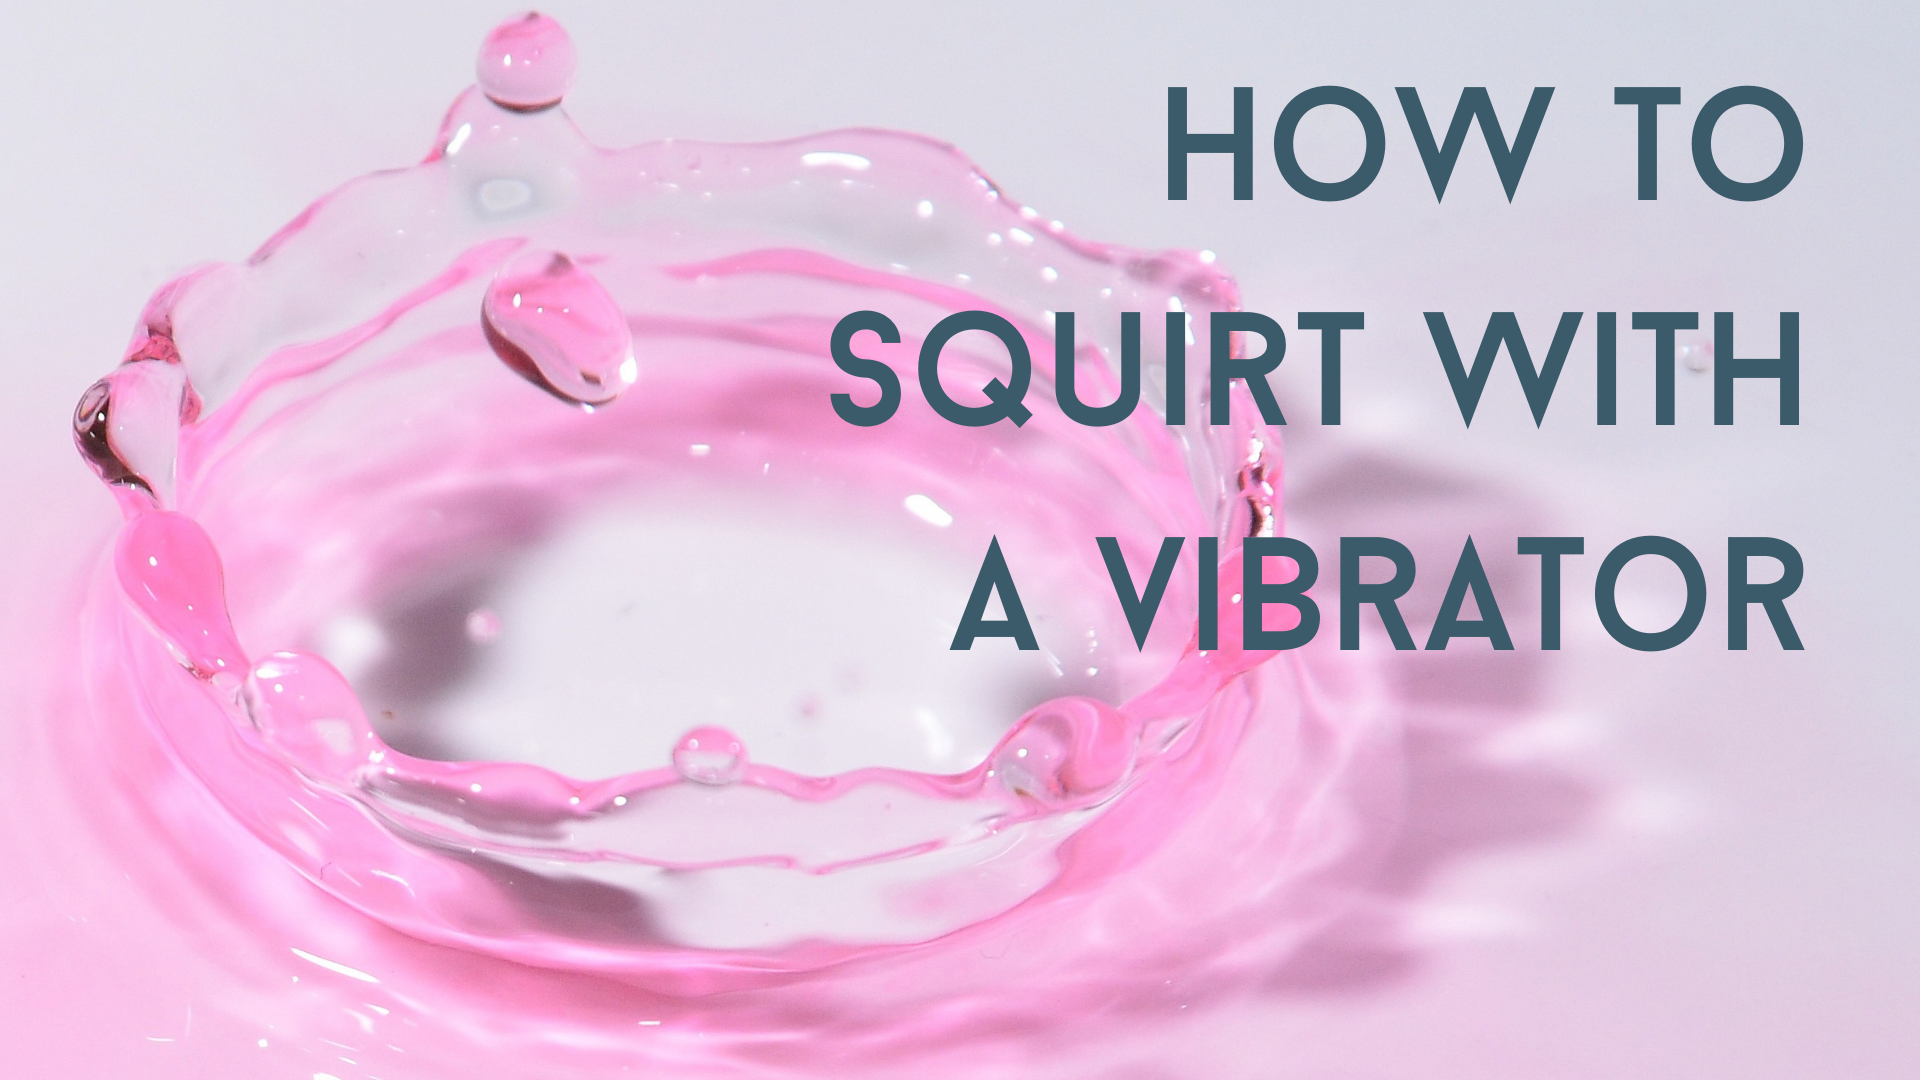 How.to squirt